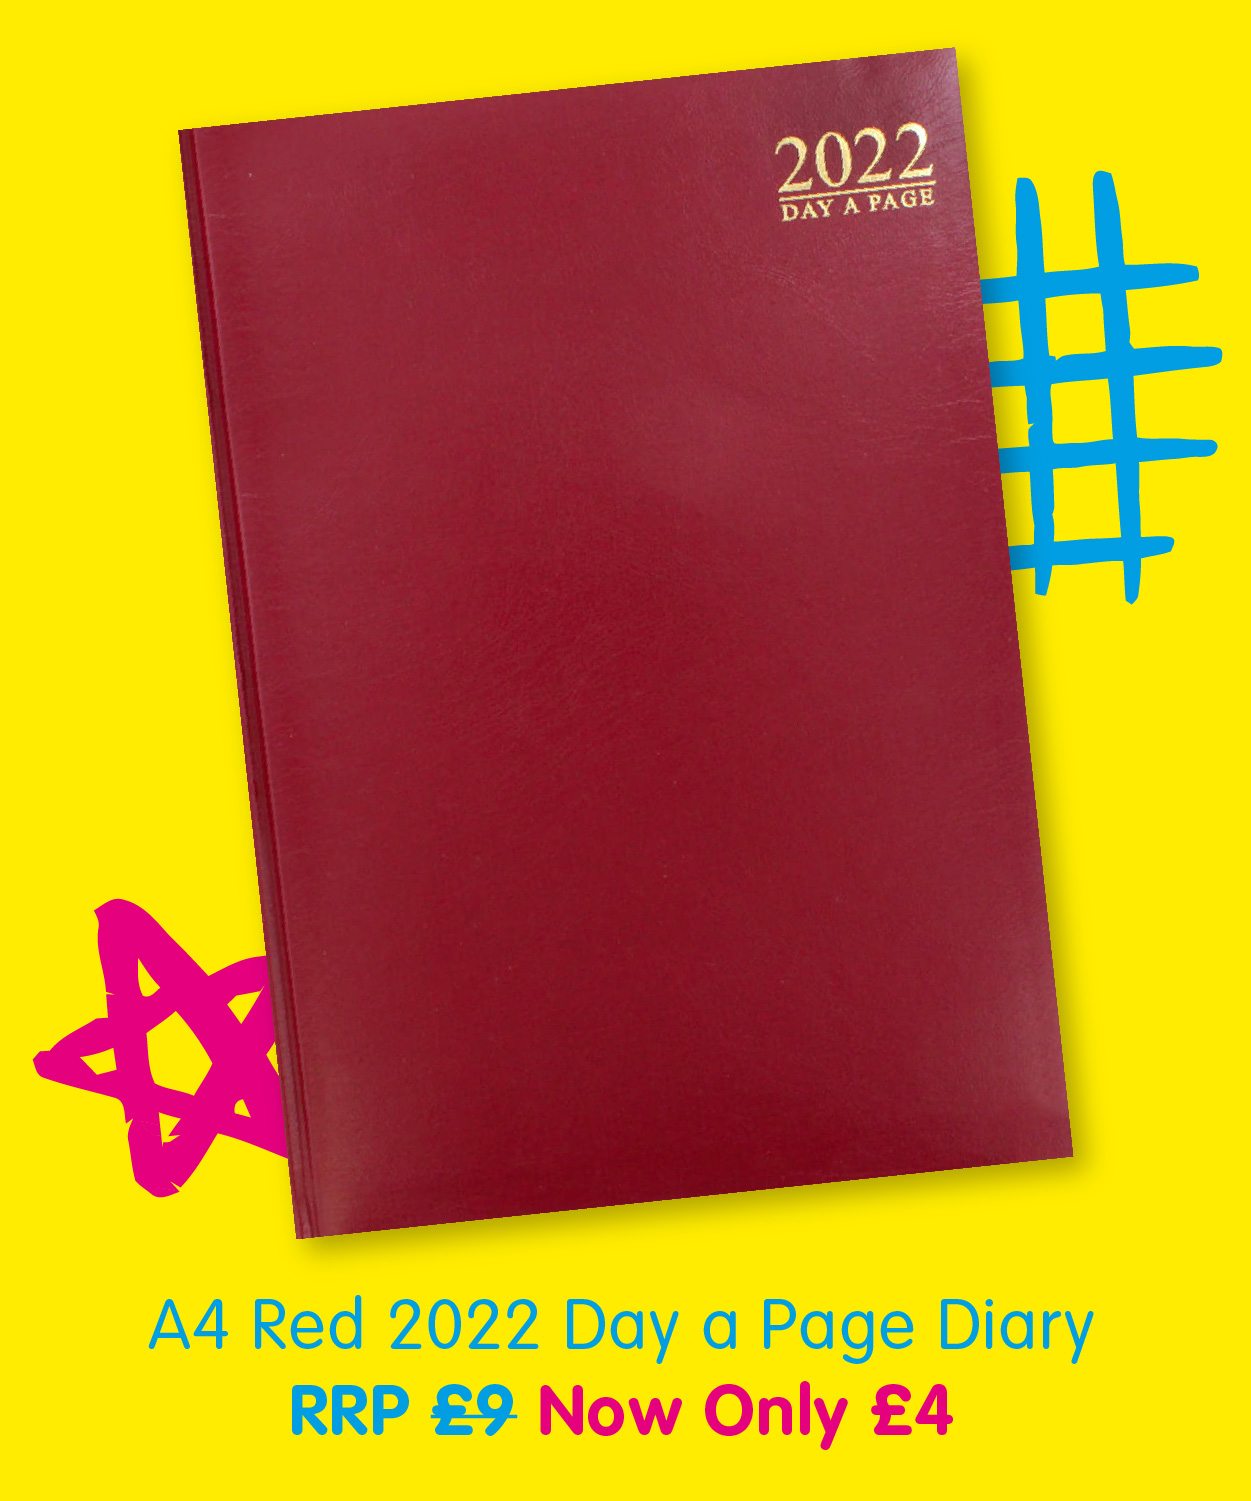 A4 Red 2022 Day a Page Diary